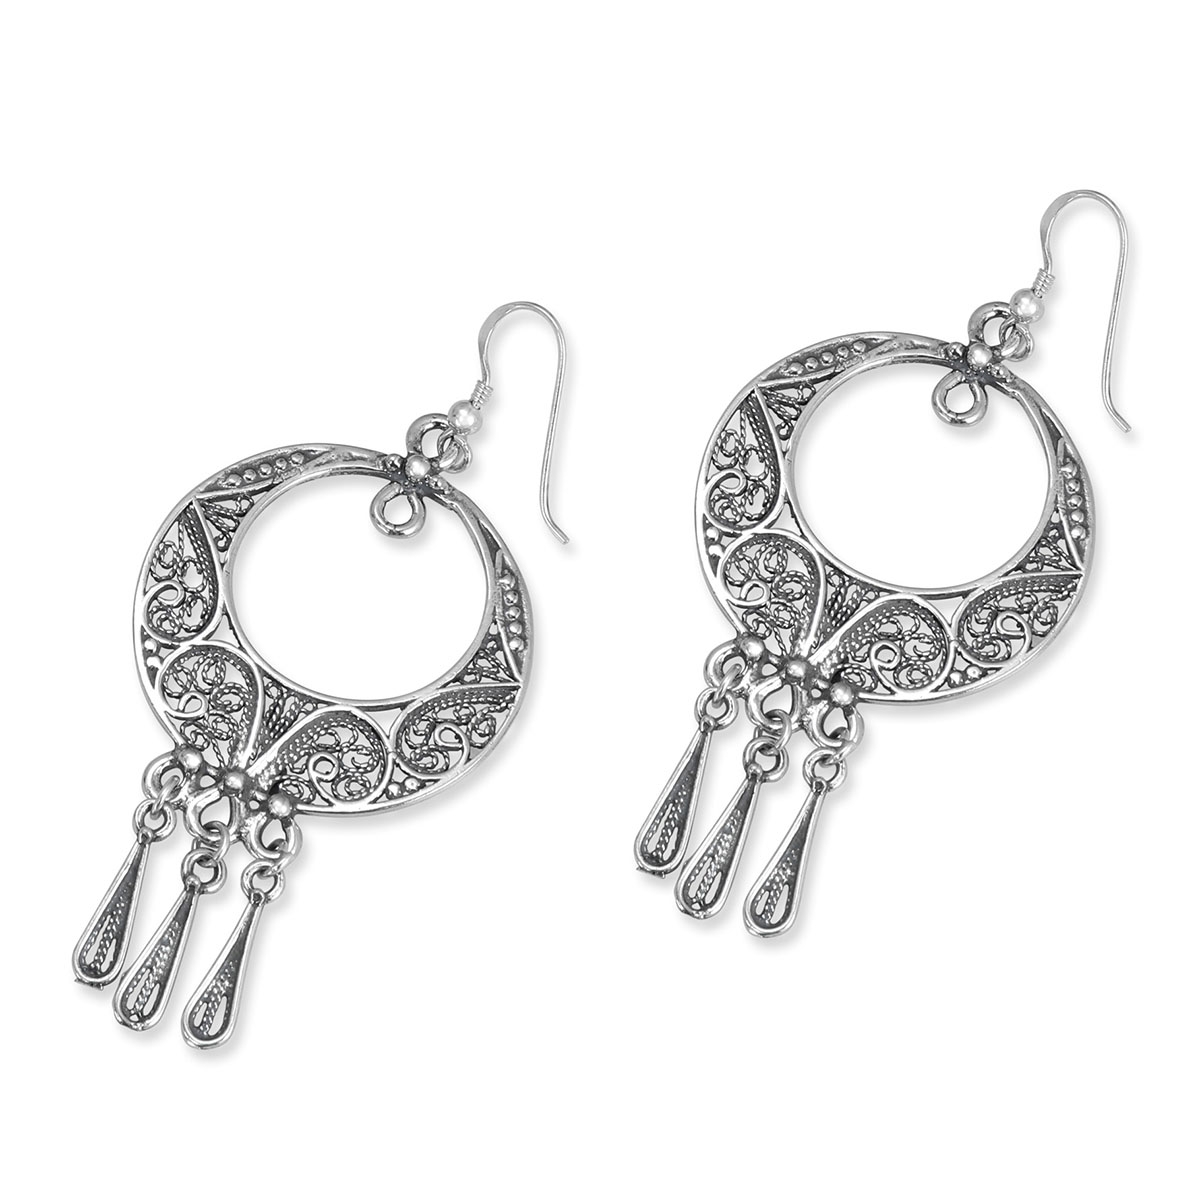 Traditional Yemenite Art Handcrafted Sterling Silver Circular Filigreed Earrings With Teardrops - 1